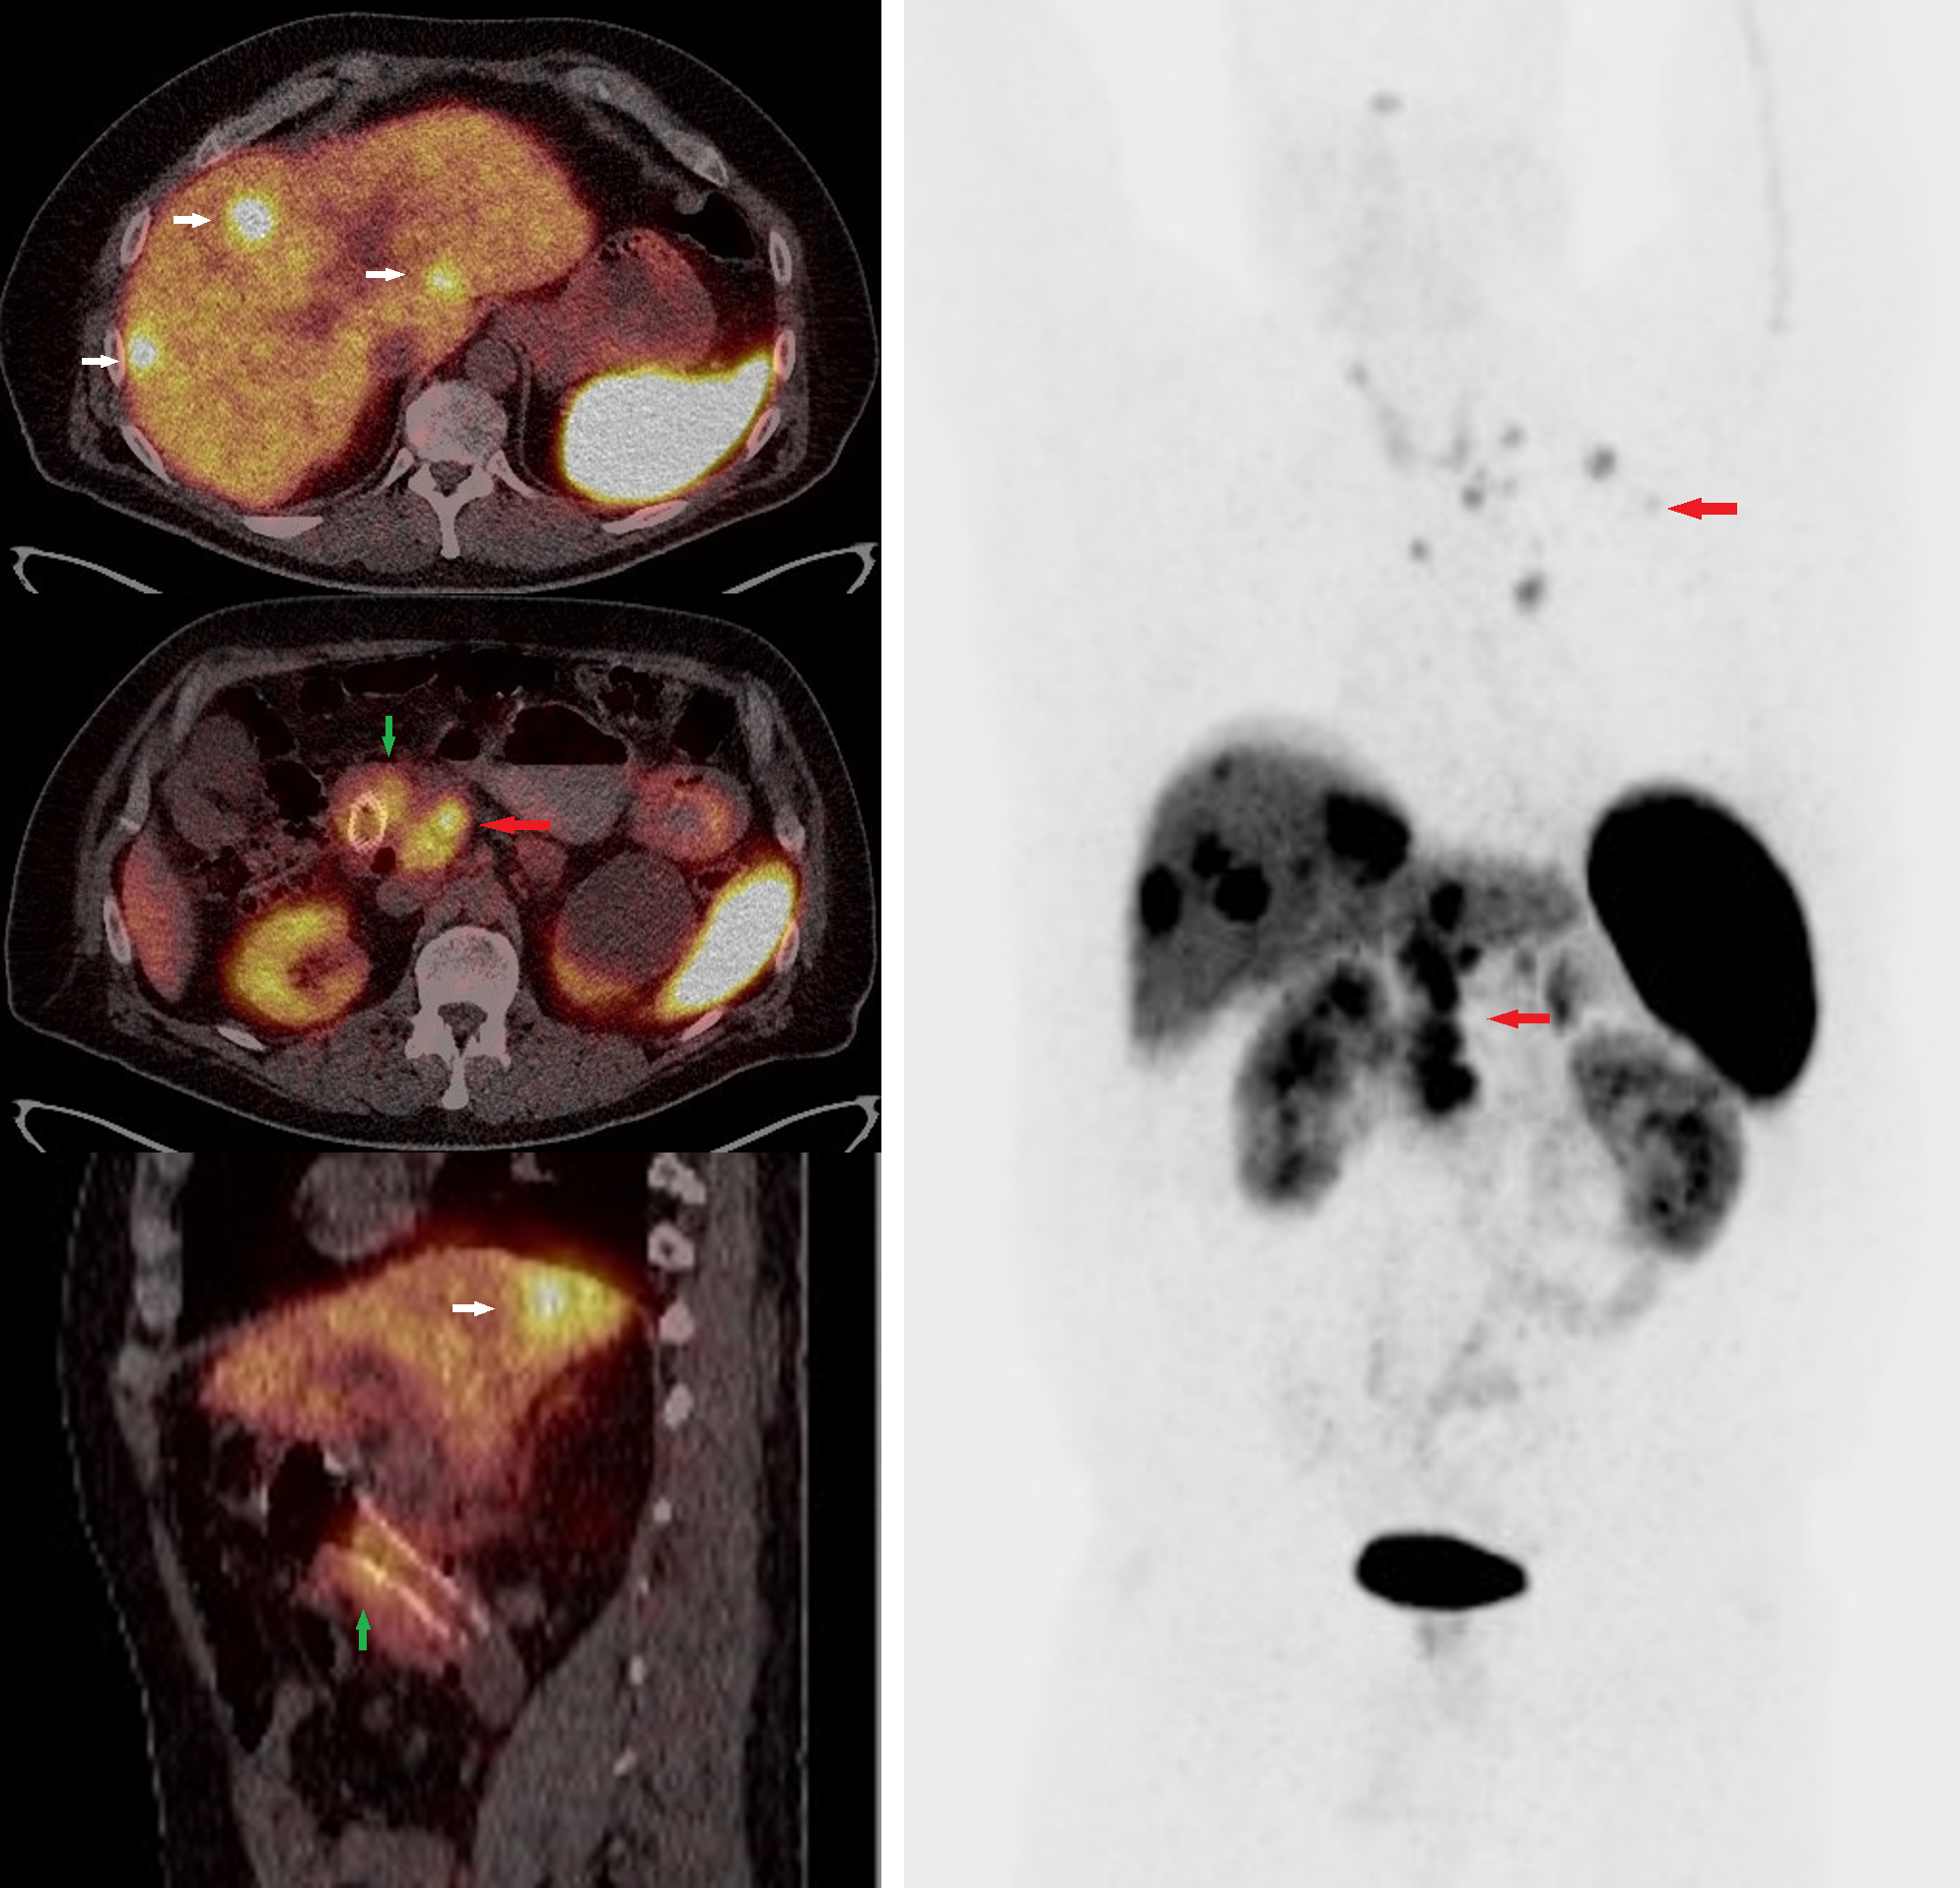 Figure 4: Ga68 DOTATOC PET/CT whole-body scan fused and MIP images of a patient with well-differentiated grade 2 neuroendocrine tumor of the duodenum with metastatic disease to the liver and lymph nodes. Green arrow: Inflammatory uptake around the stent in the duodenal tumor. Red arrows: Radiotracer uptake in conglomerate retroperitoneal and thoracic lymph nodes. White arrow: Radiotracer avid hepatic metastases.